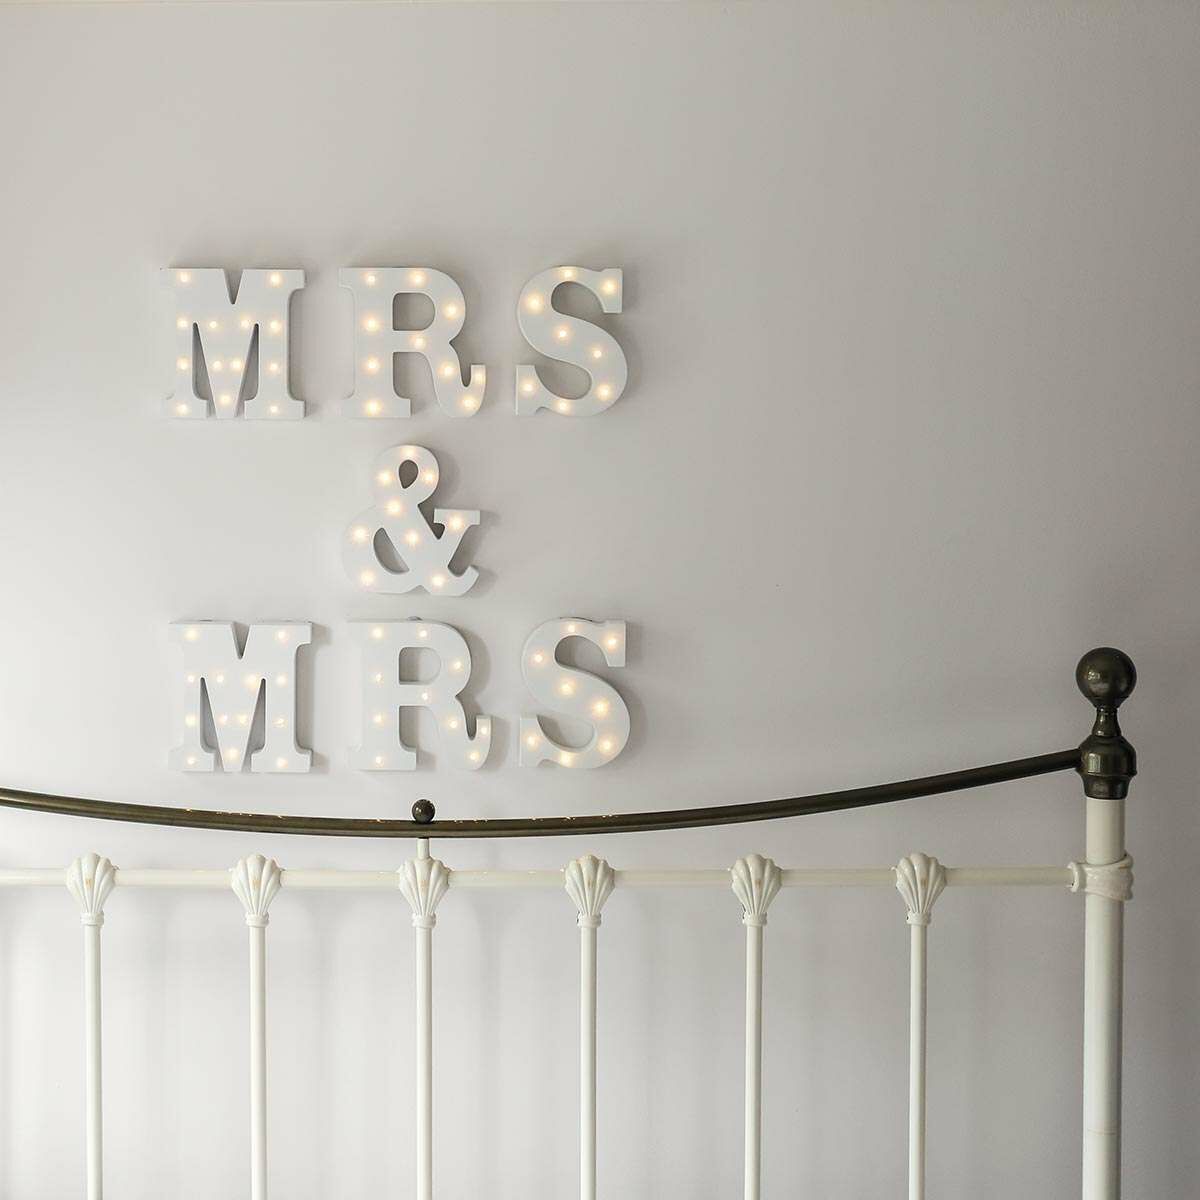 Mrs & Mrs Battery Light Up Circus Letters, Warm White LEDs image 4